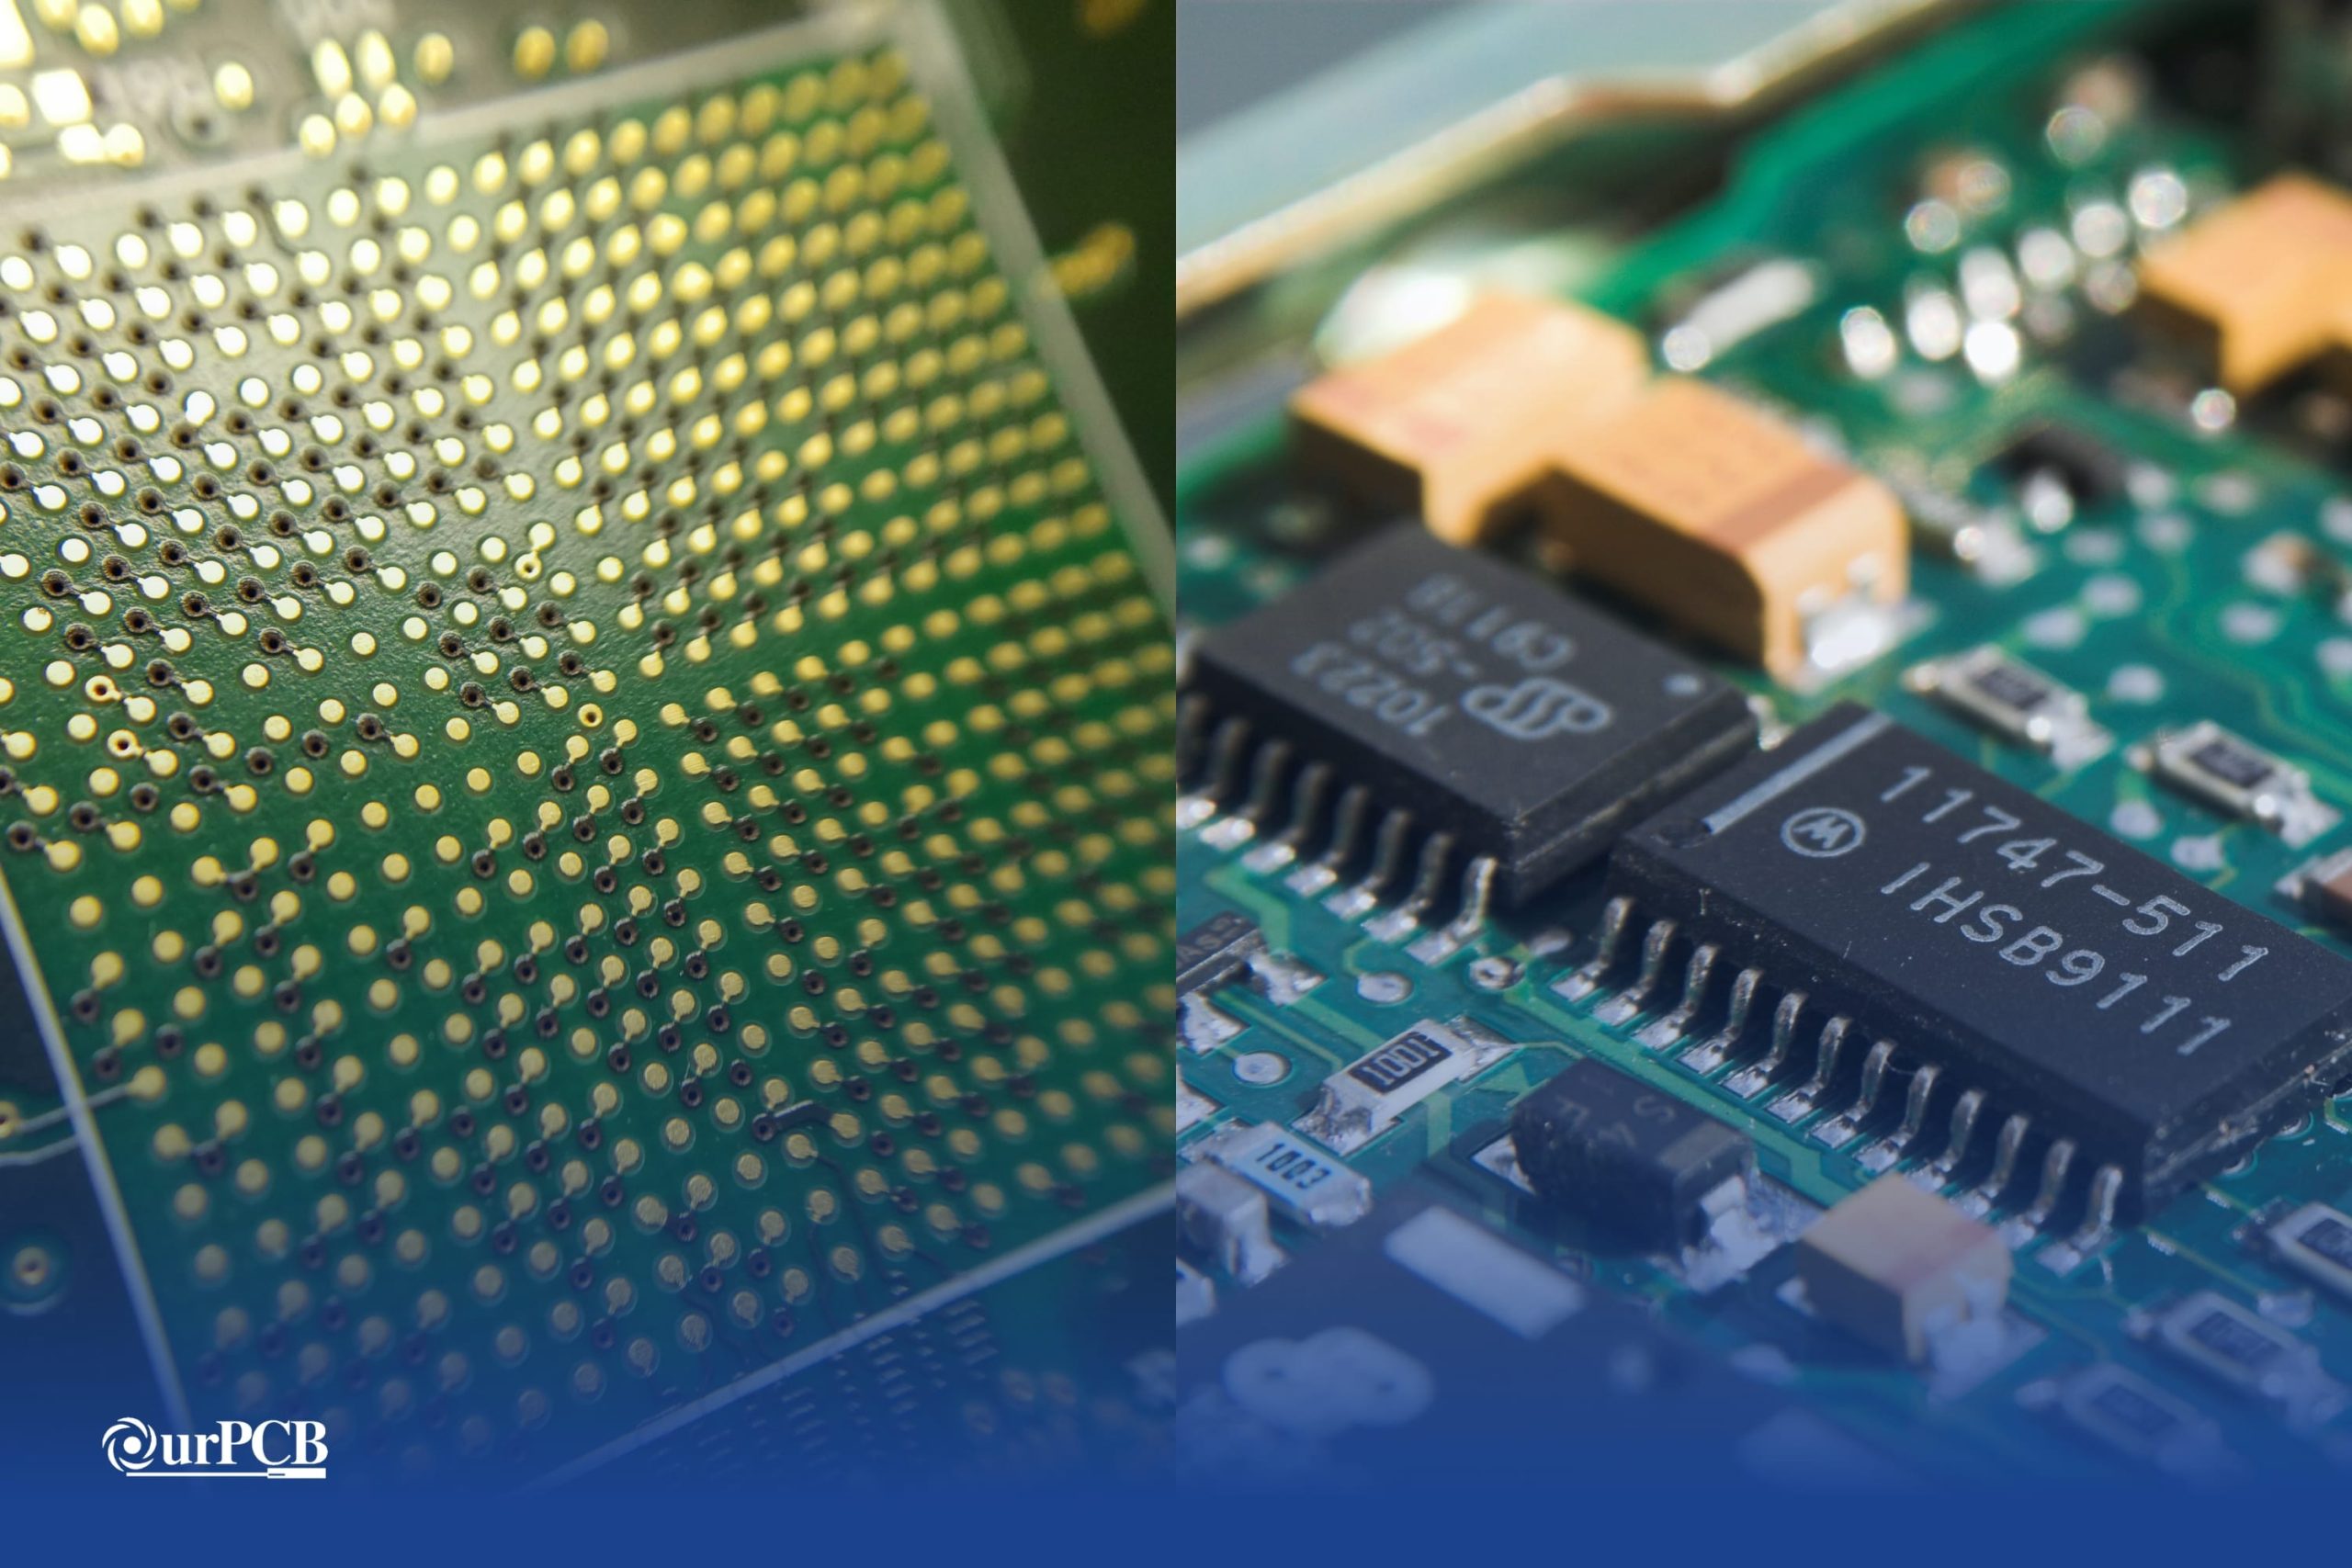 How does a BGA PCB differ from other PCBs?